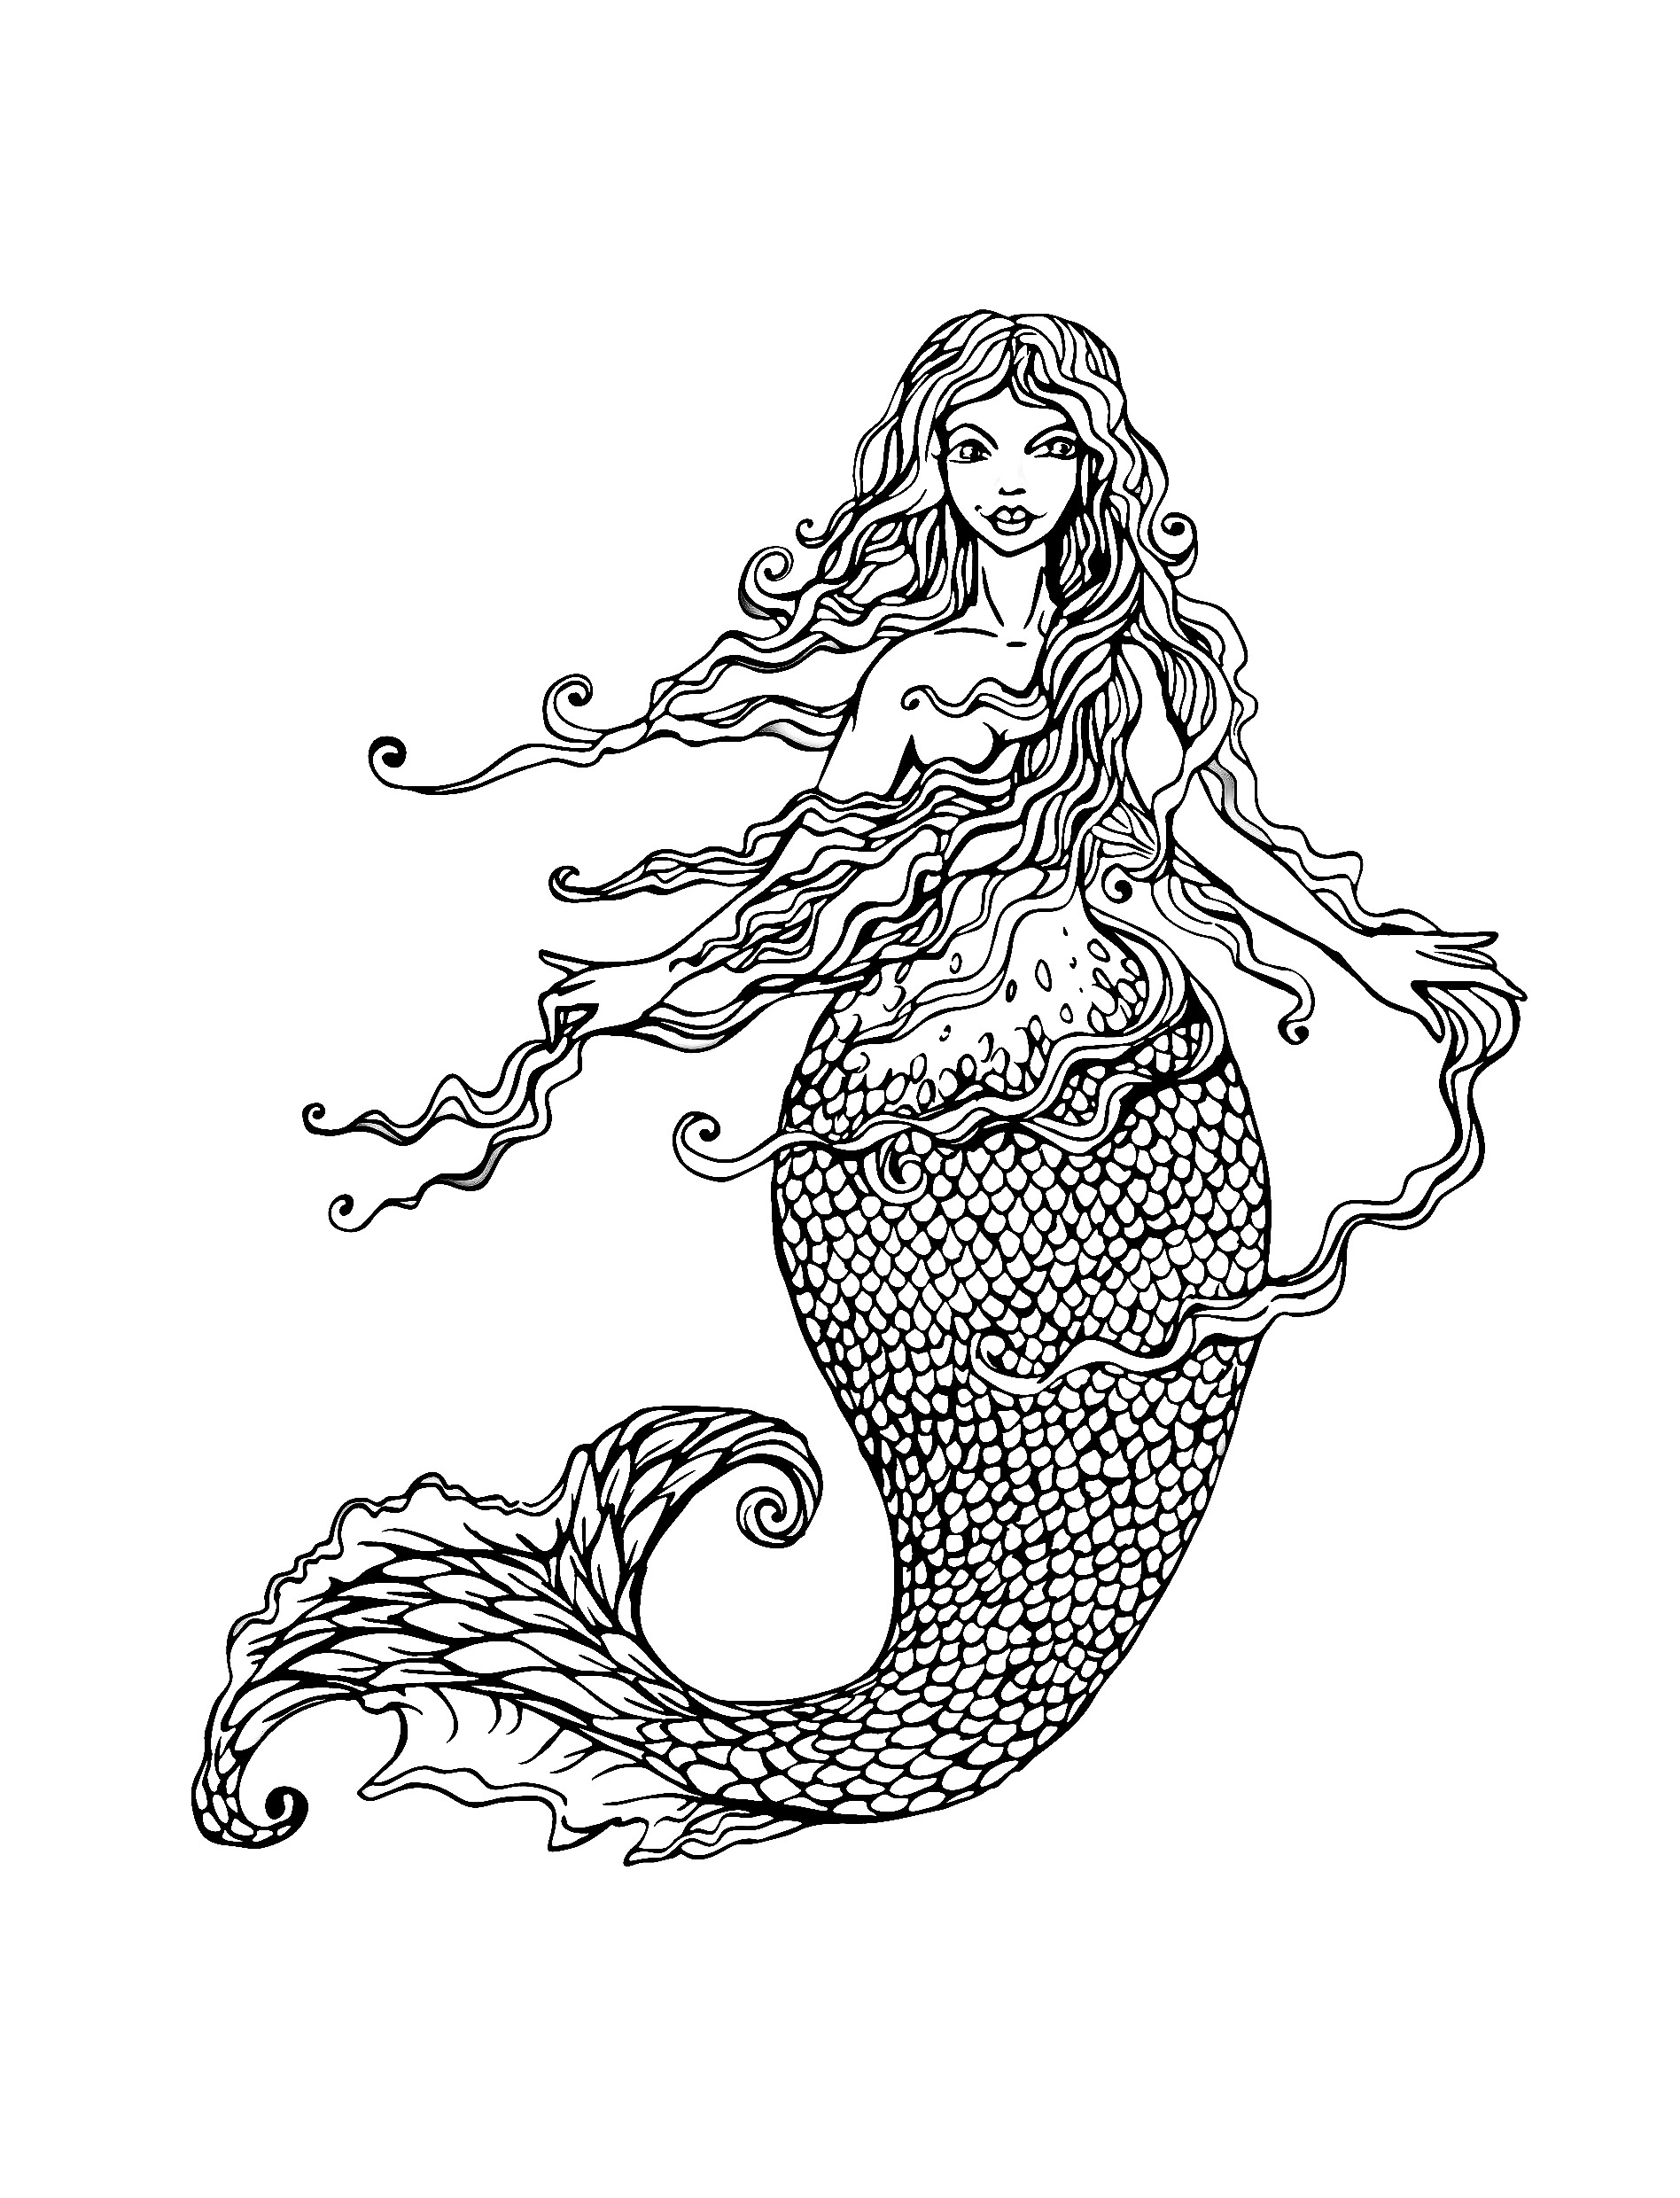 Download Mermaid Coloring Pages for Adults - Best Coloring Pages ...